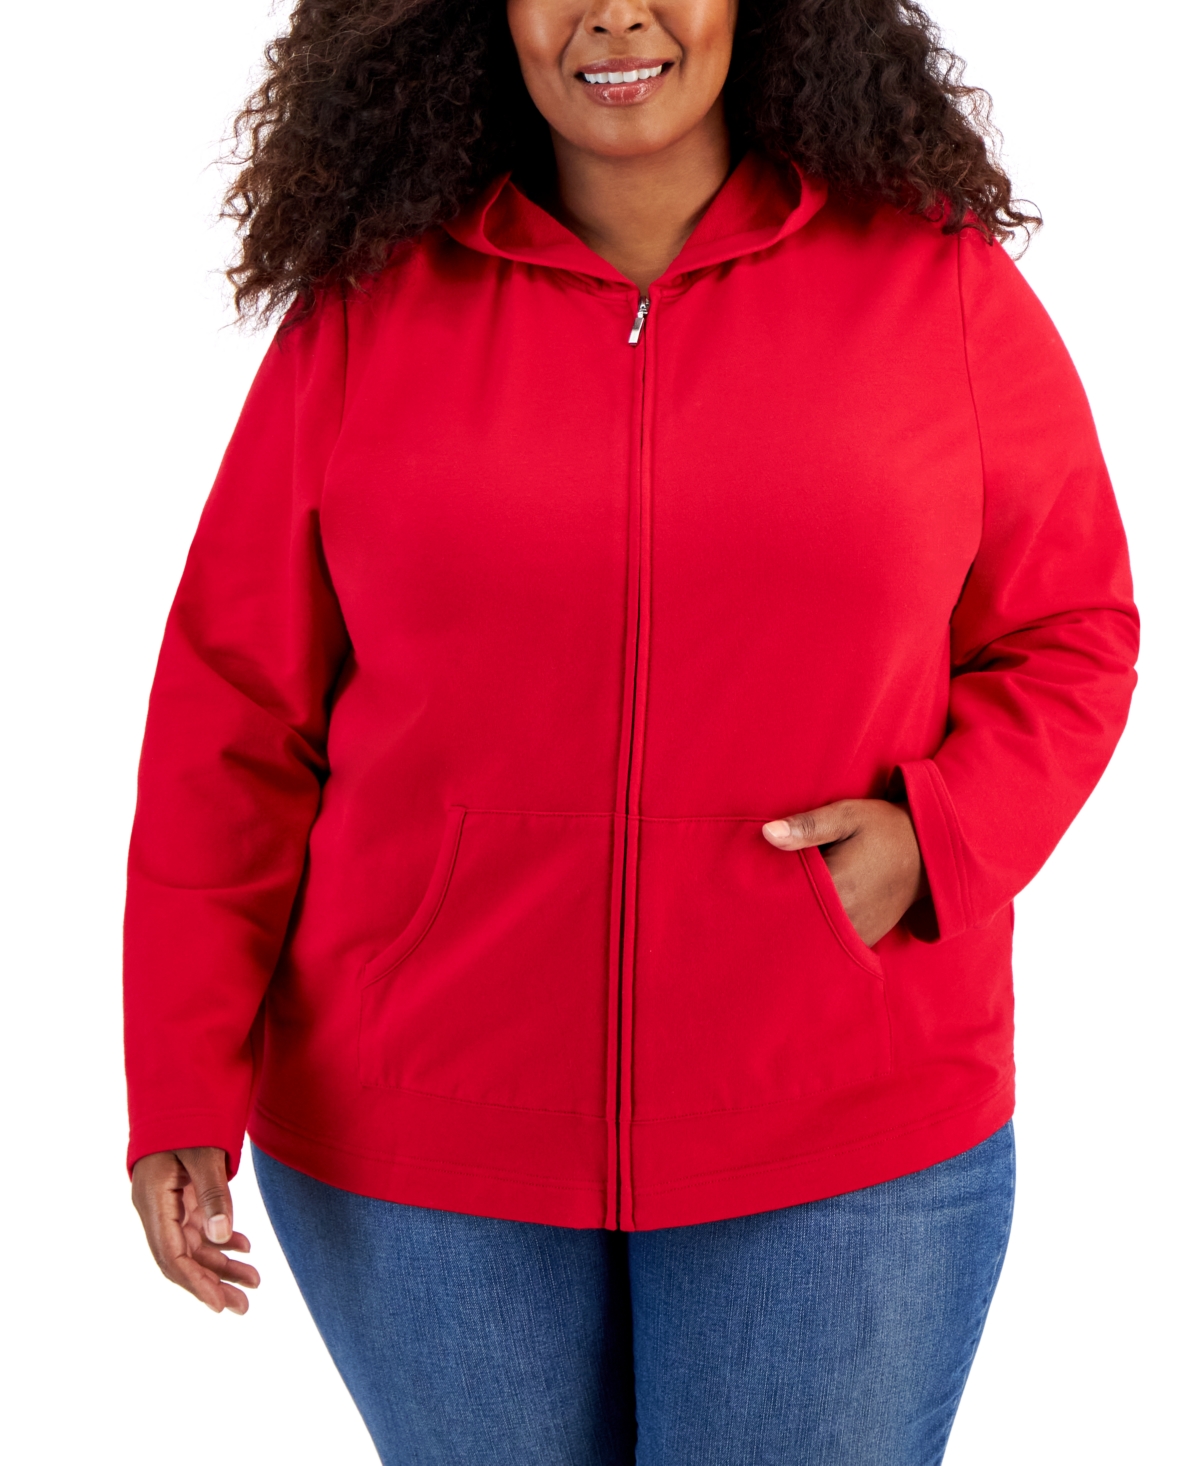 Plus Size Zip-Up Hoodie, Created for Macy's - New Red Amore